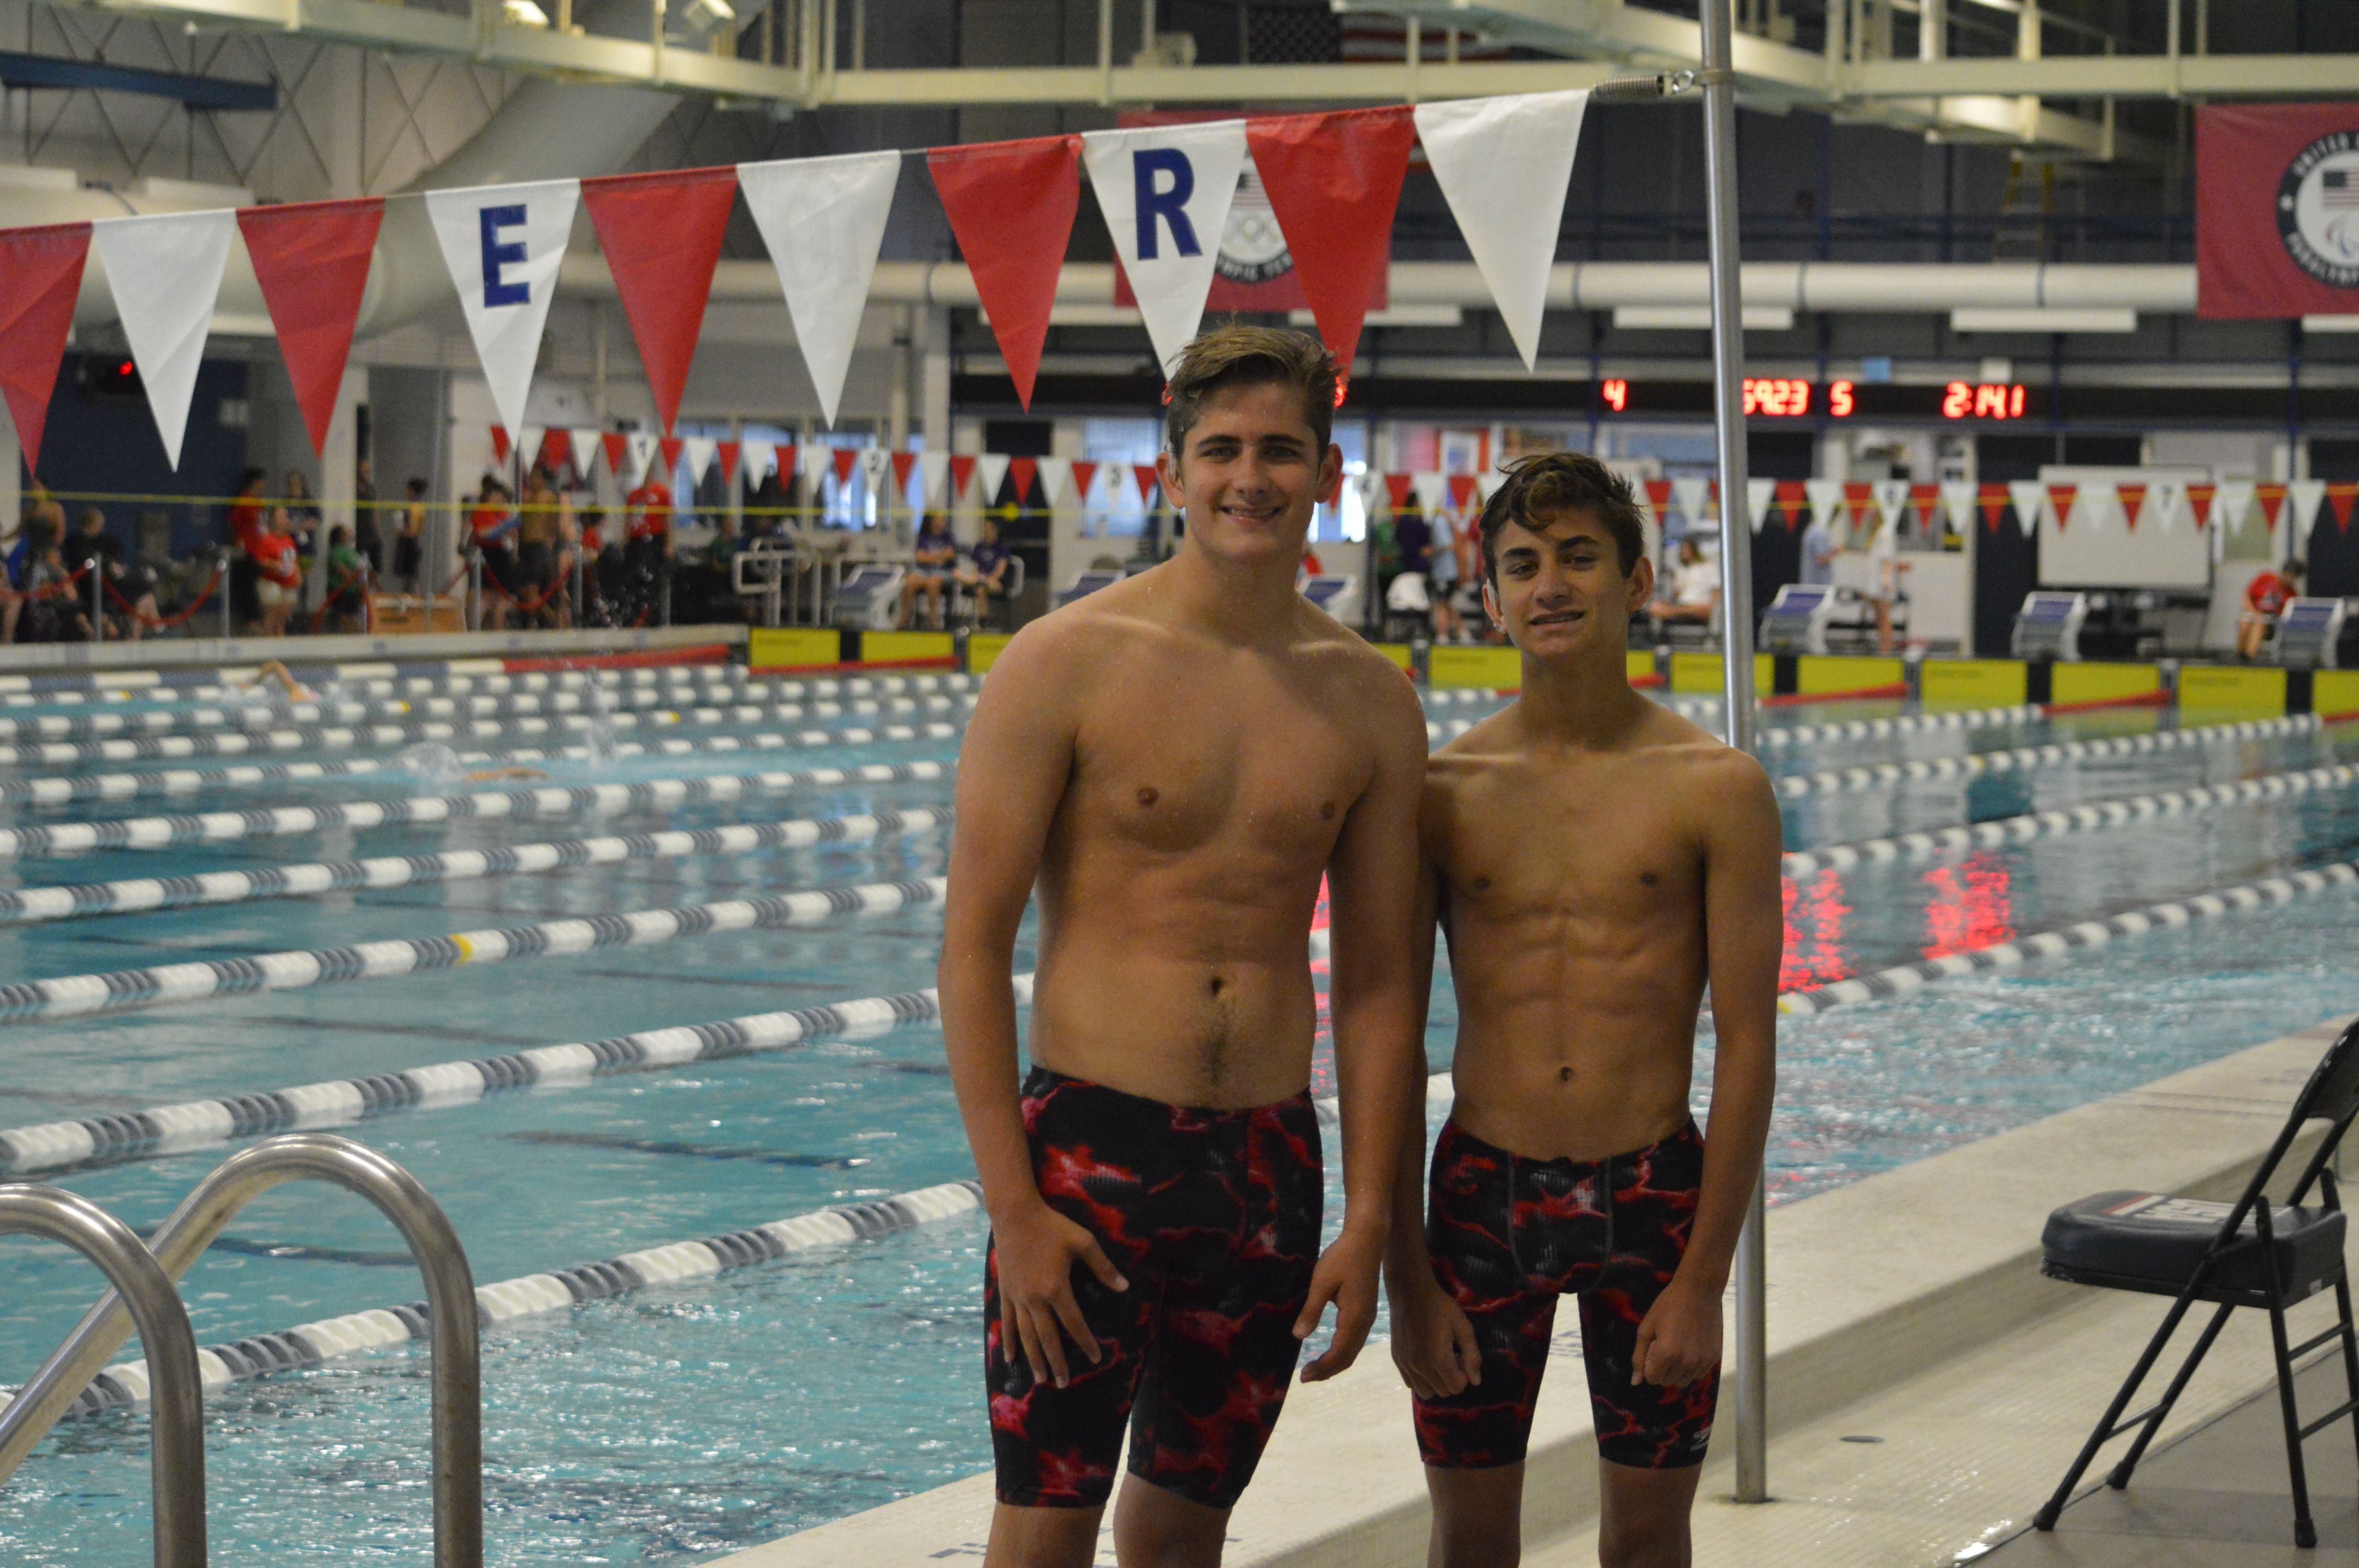 A picture of two teen boys, Ethan and Gavin, wearing red and black swim shorts, standing in front of a pool. 